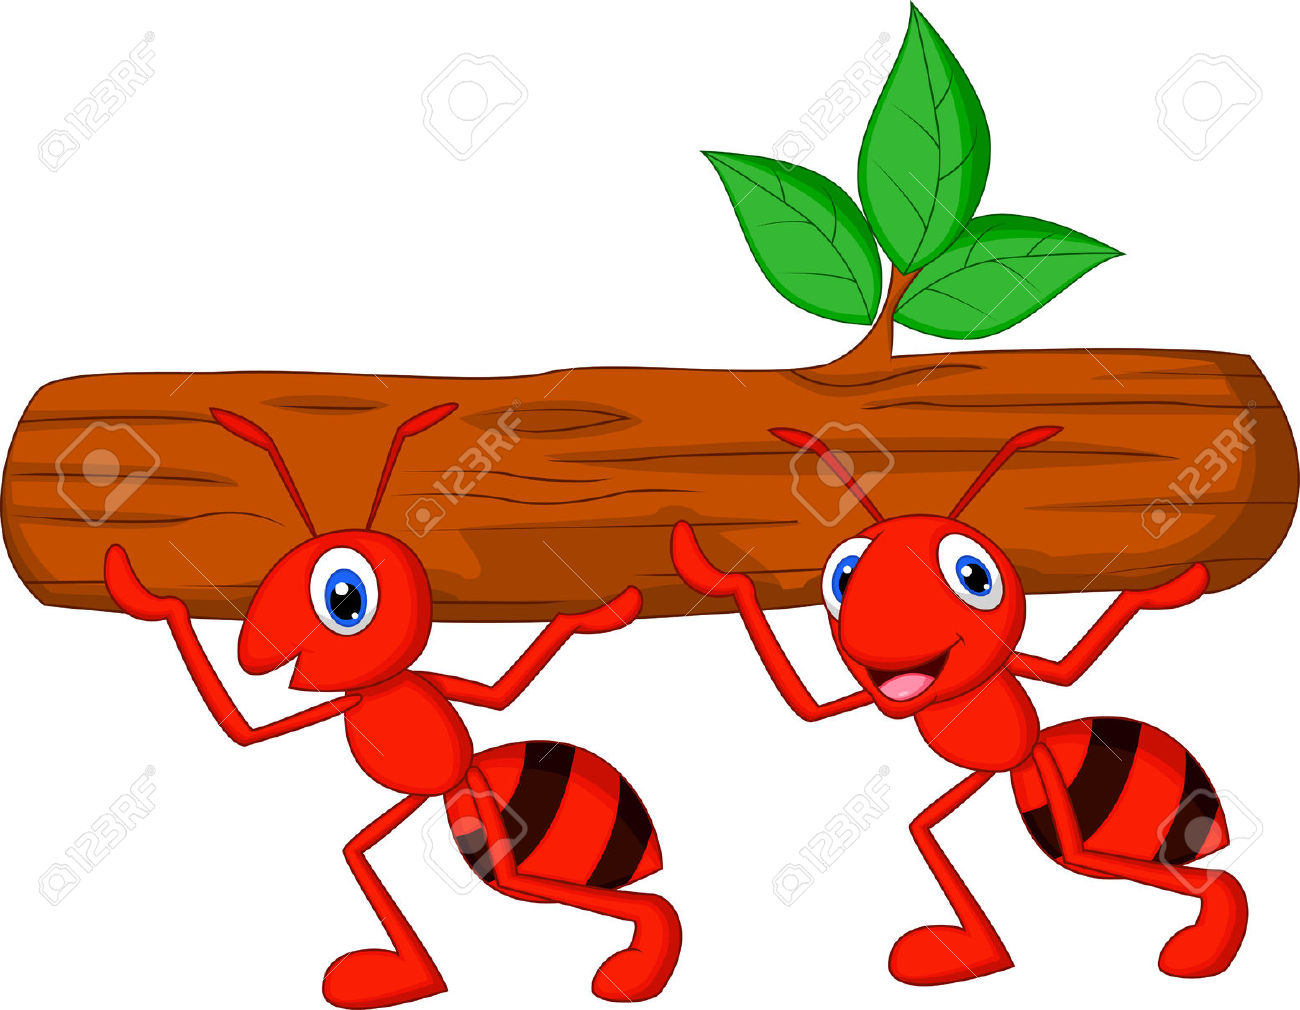 4,251 Ant Cartoon Cliparts, Stock Vector And Royalty Free Ant.